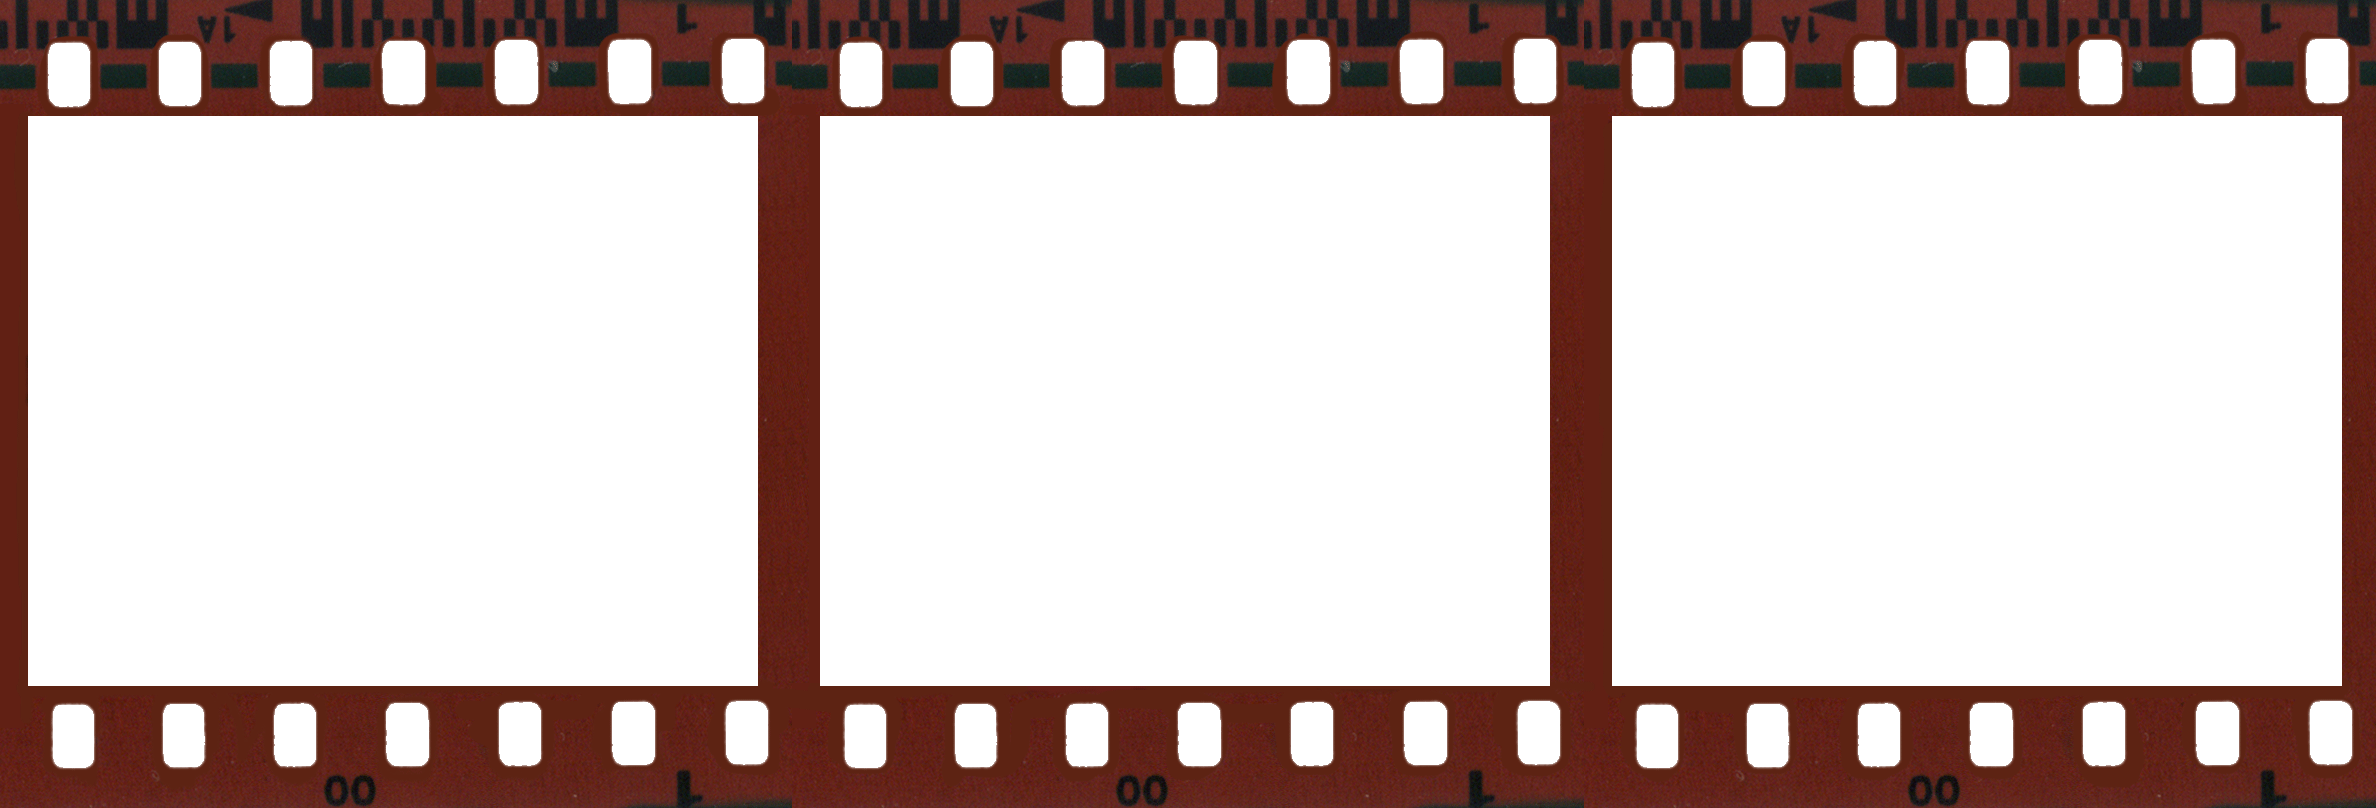 clipart for movie maker - photo #41